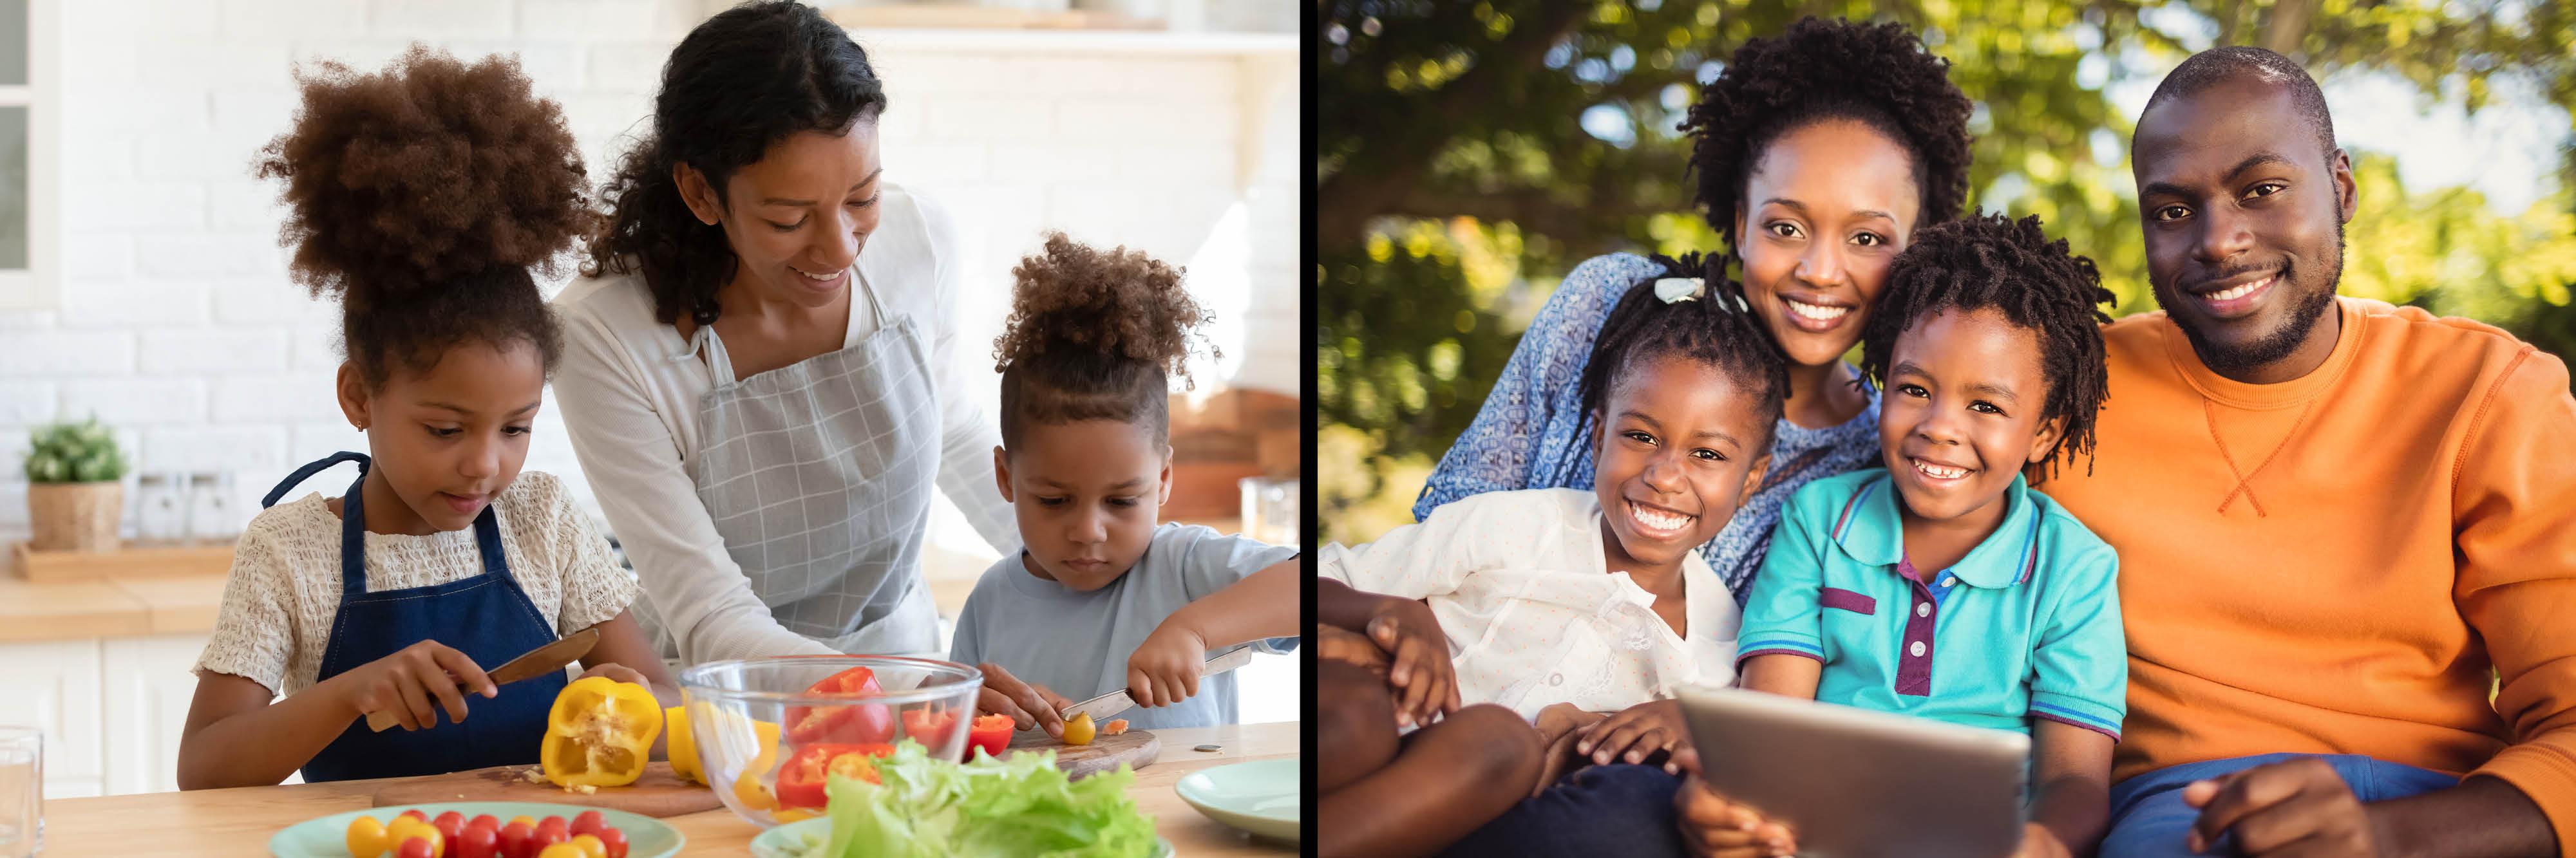 An African American mother preparing a meal with two daughters on the left, an African American family holding an Ipad on the right.  (**copyright/LW)